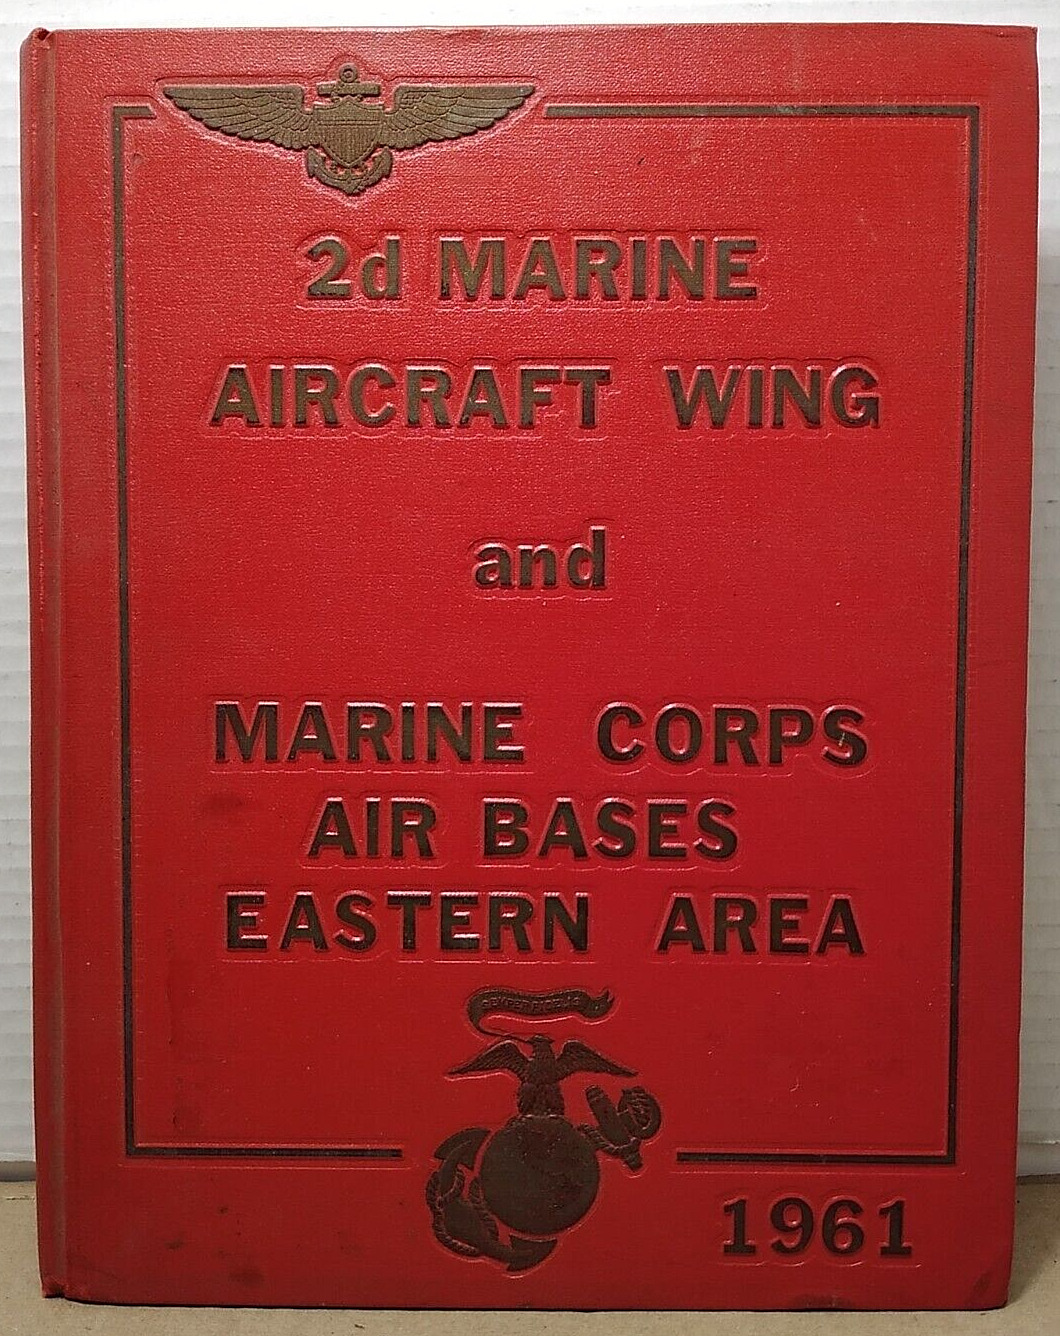 2d Marine Aircraft Wing & Marine Corps Air Bases Eastern Area 1961 Hardcover